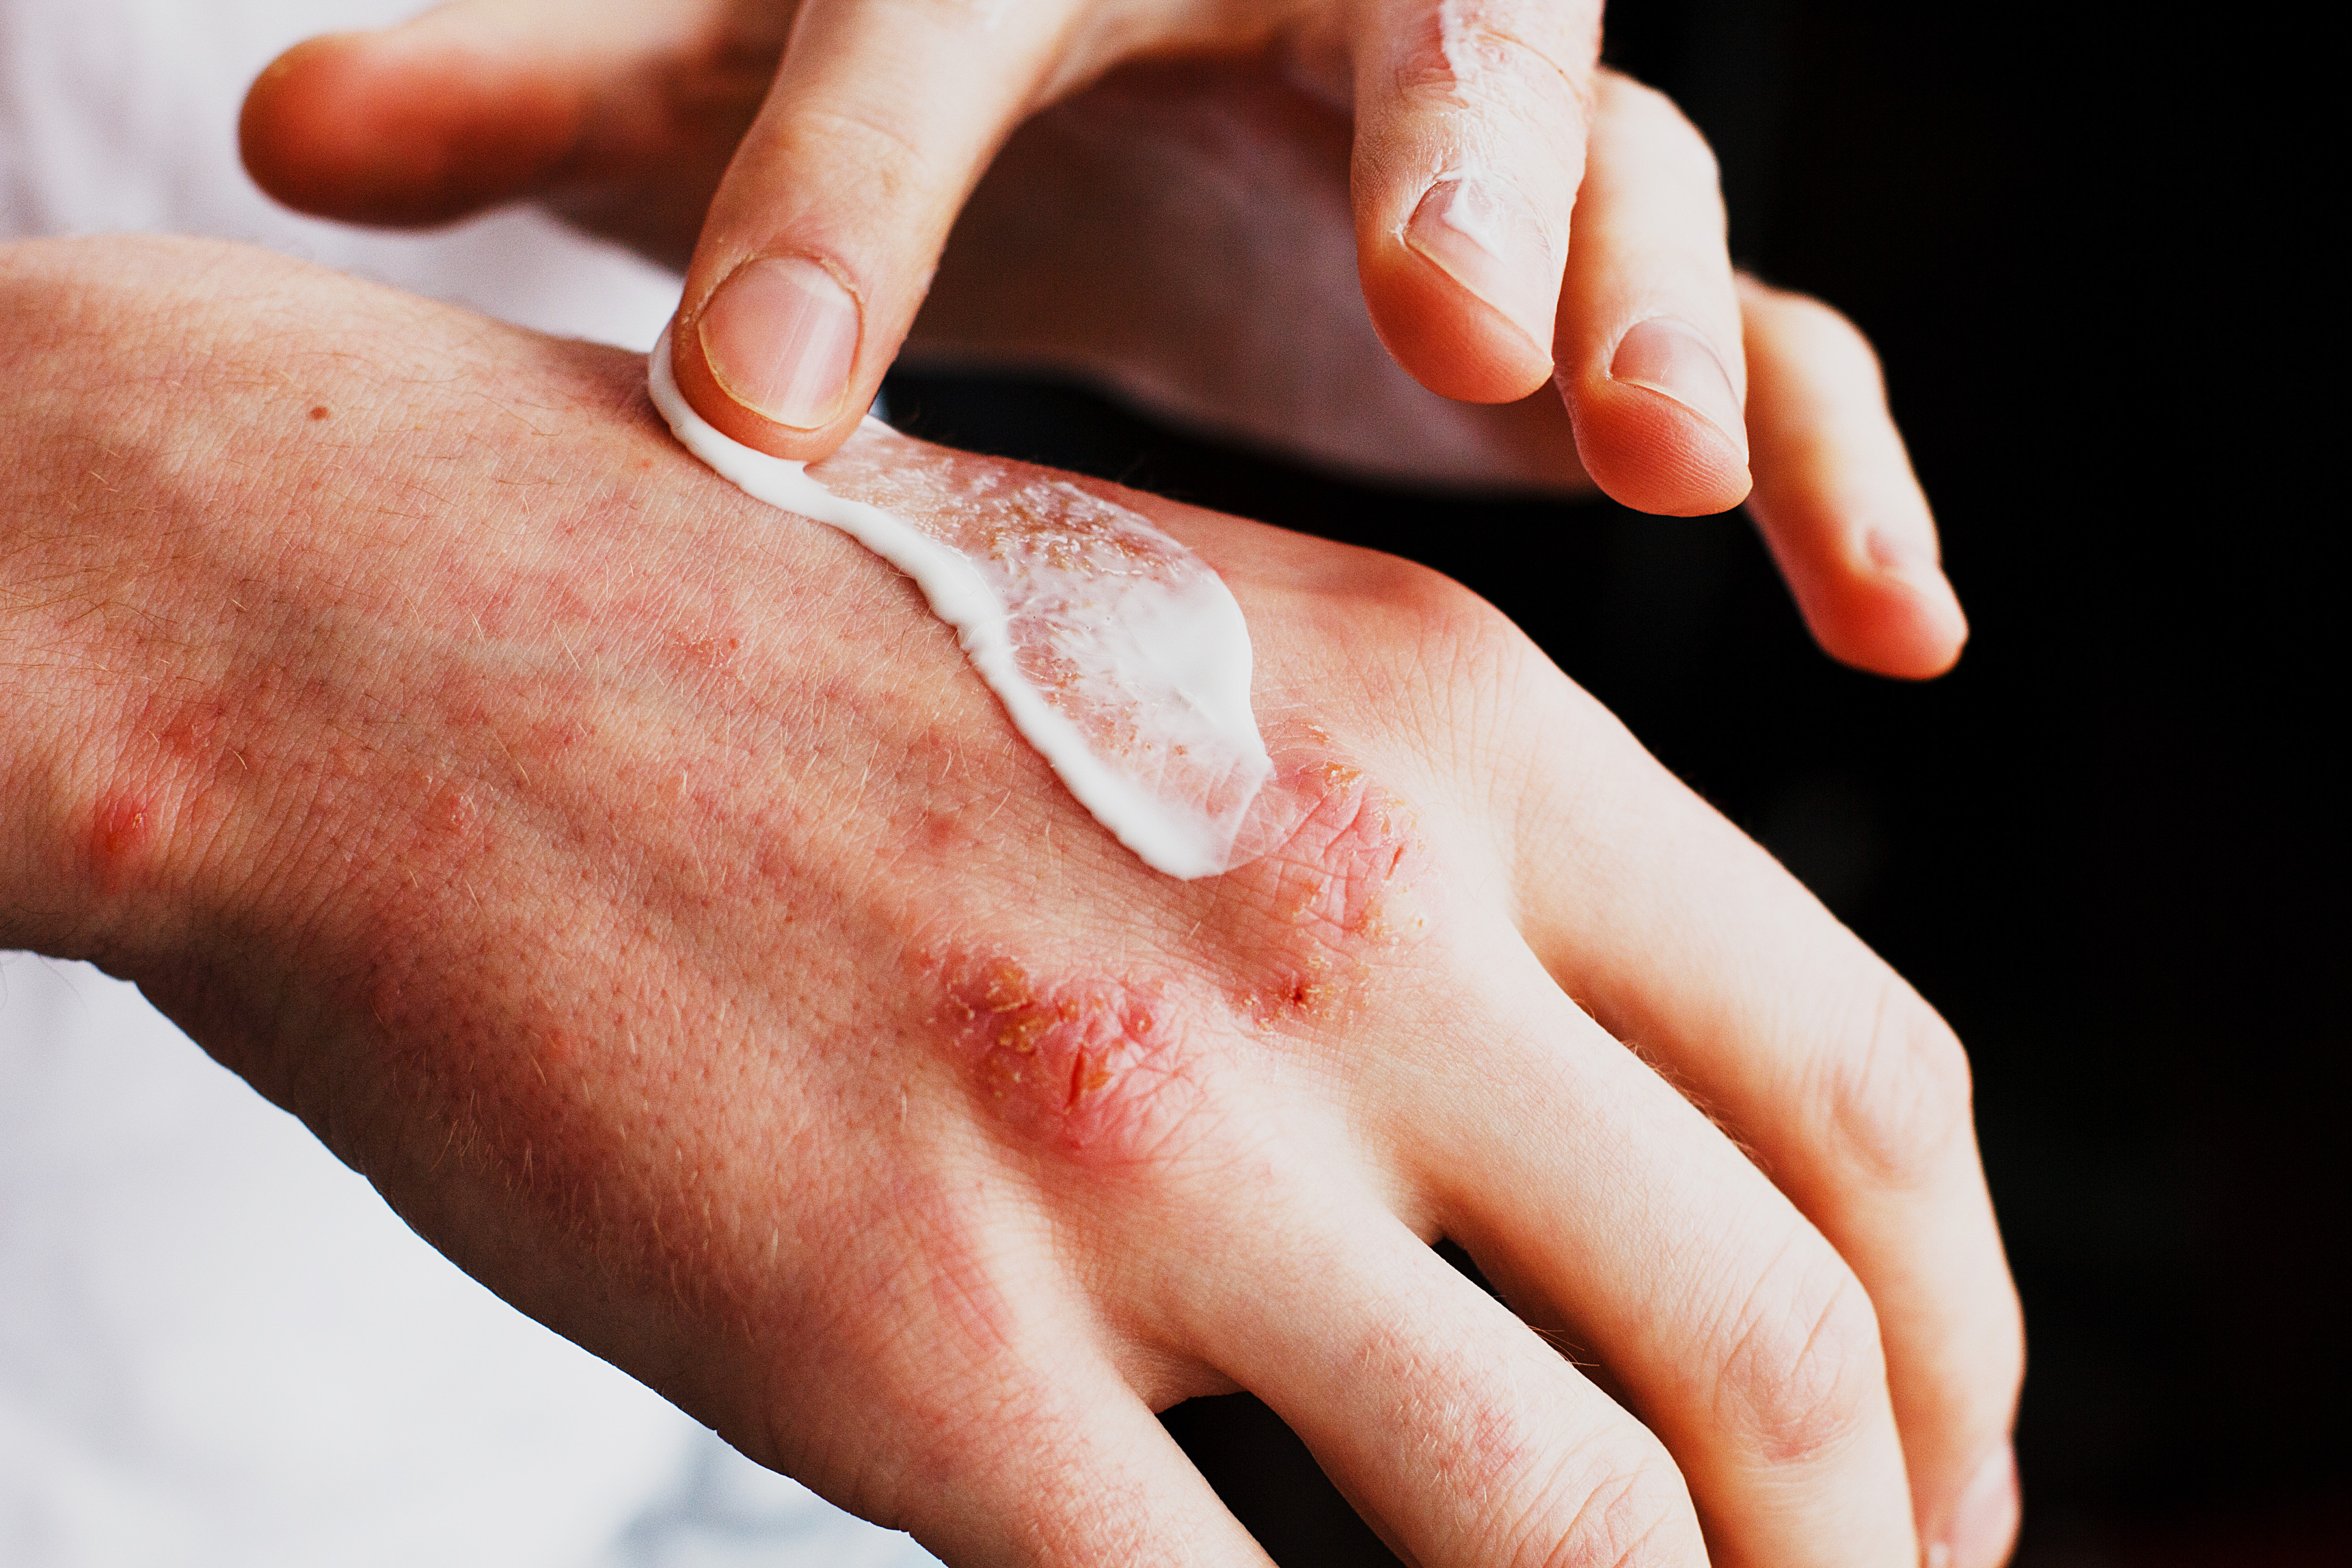 Scientists at HKU have made a breakthrough in the treatment of painful skin condition eczema. Photo: Shutterstock